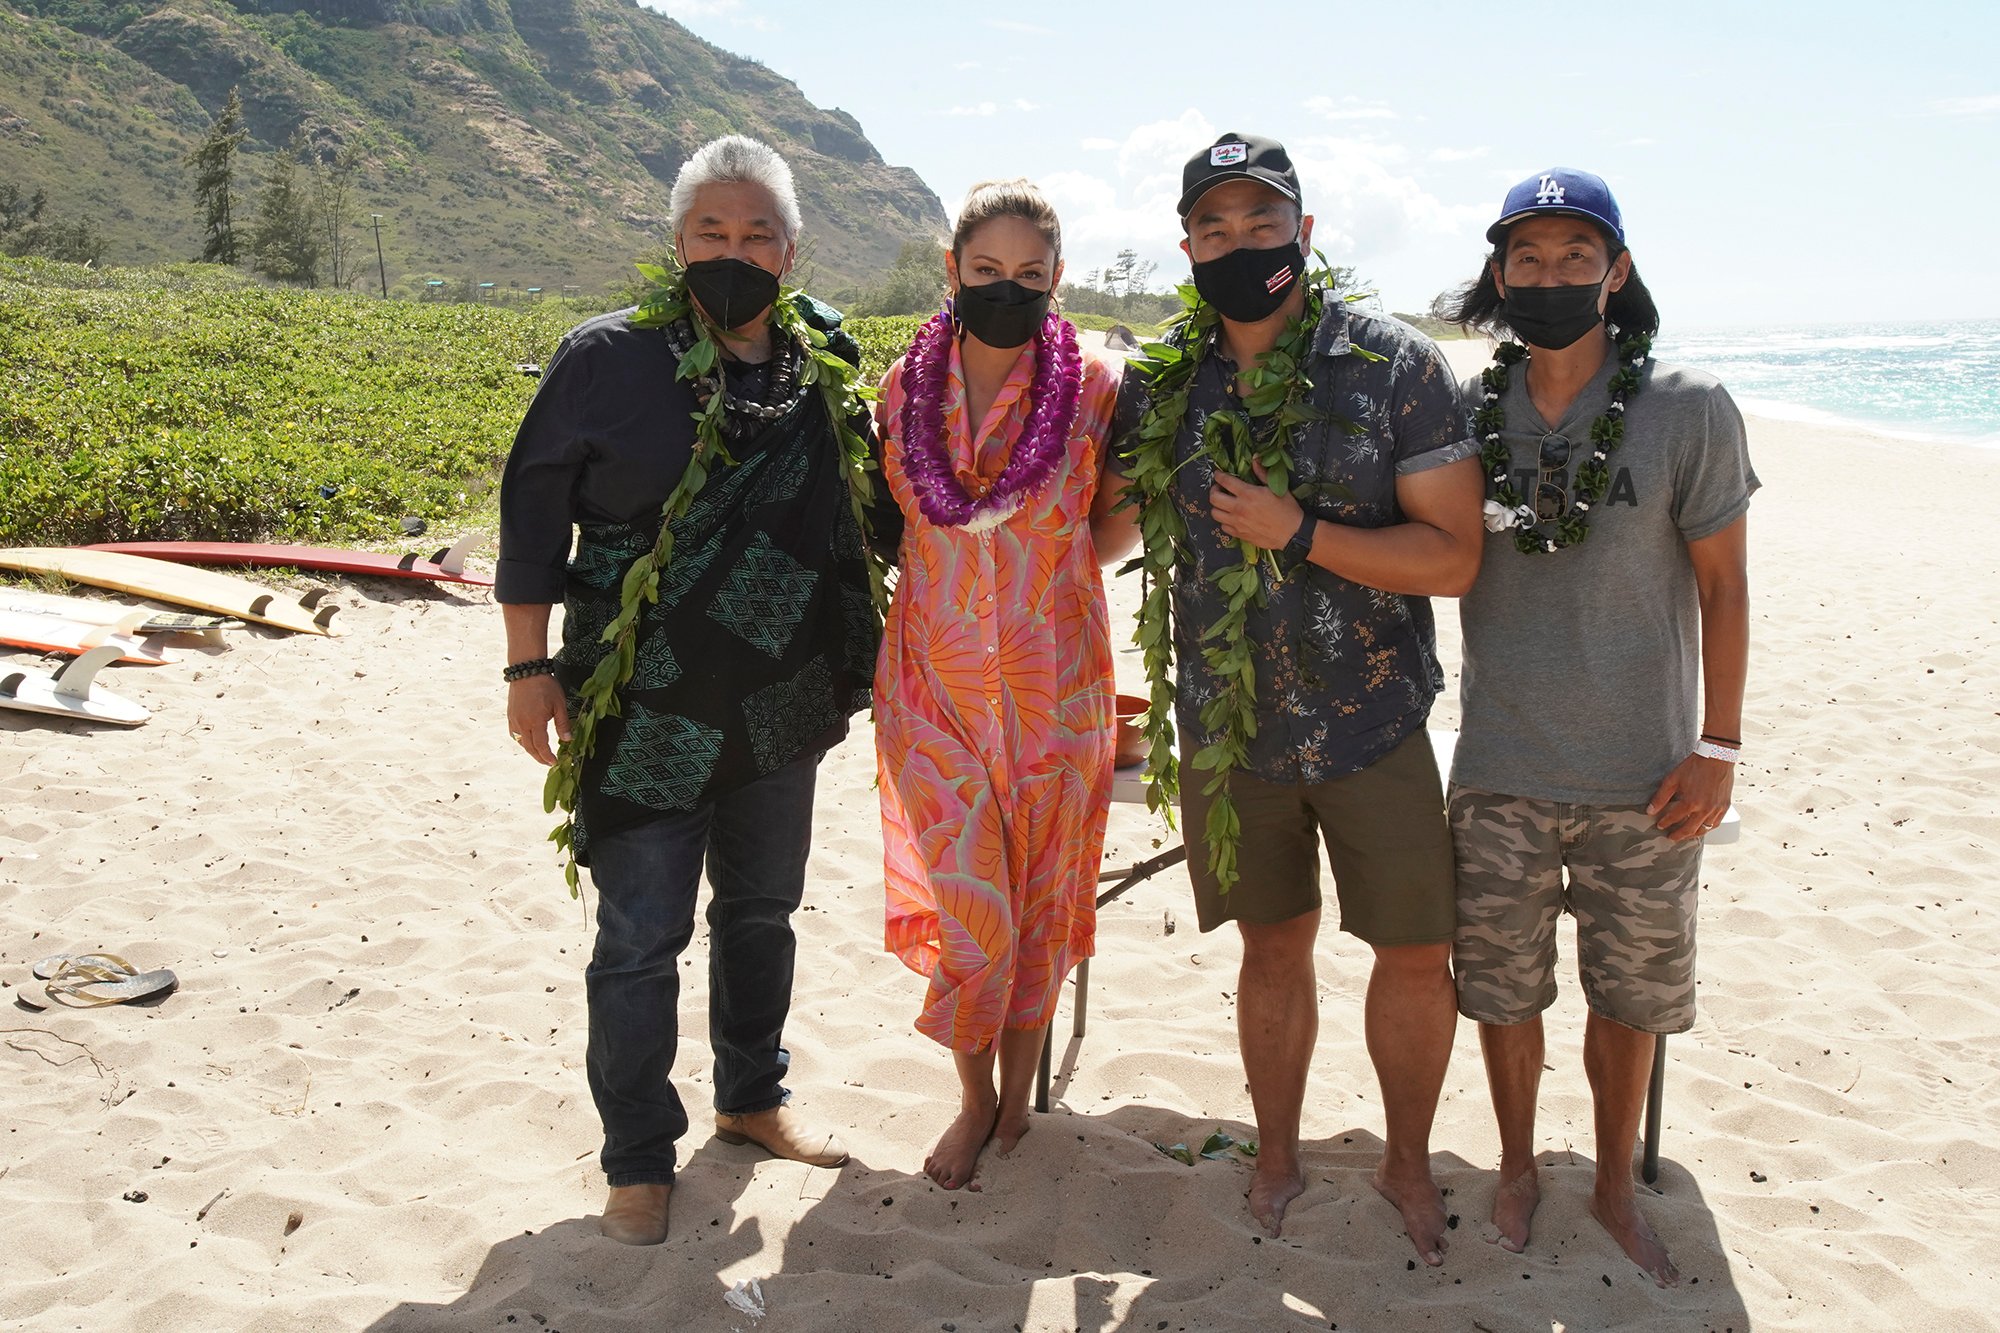 NCIS: HAWAIʹI kicked off its first season production at Mokulē‘ia Beach on Oahu with a traditional Hawaiian blessing in honor of its host Hawaiian culture, which was held in line with the series’ overall filming safety protocols. Series stars Vanessa Lachey, Noah Mills, Jason Antoon, Yasmine Al-Bustami and Tori Anderson, as well as the producers and the NCIS: HAWAIʹI crew, participated. Kahu (Officiant) Kordell Kekoa officiated the ceremony, which included traditional royal maile leis, Oli Aloha (welcoming chant), and Pule Ho’oku’u (closing prayer). In honor of the show’s premiere season, the ceremony centered on the constant motion of the ocean and how the moving ocean waters, driven by the winds and tides, connects the entire planet. Pictured L-R: Kahu (Officiant) Ramsey Taum presides over the blessing ceremony, Vanessa Lachey, Executive Producer / Director Larry Teng, and Director of Photography Yasu Tanida Photo: Karen Neal/CBS ©2021 CBS Broadcasting, Inc